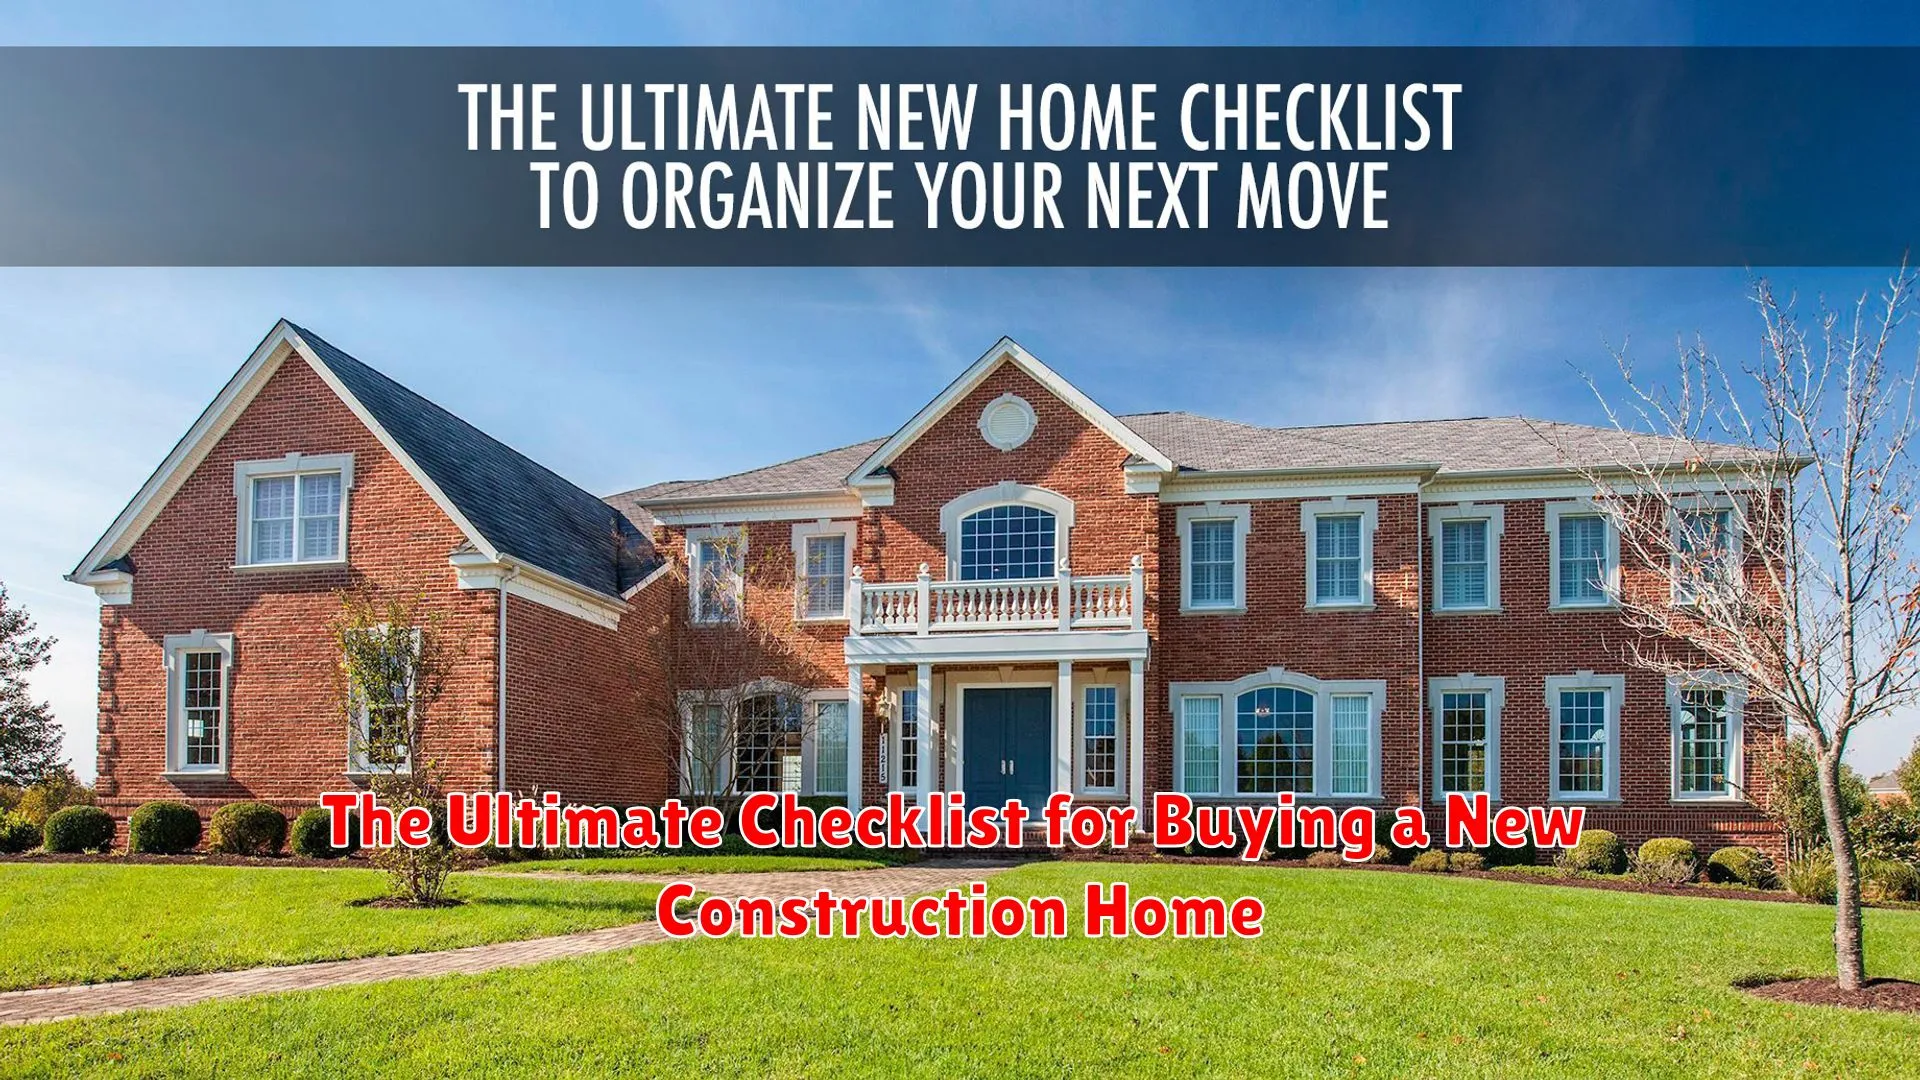 The Ultimate Checklist for Buying a New Construction Home